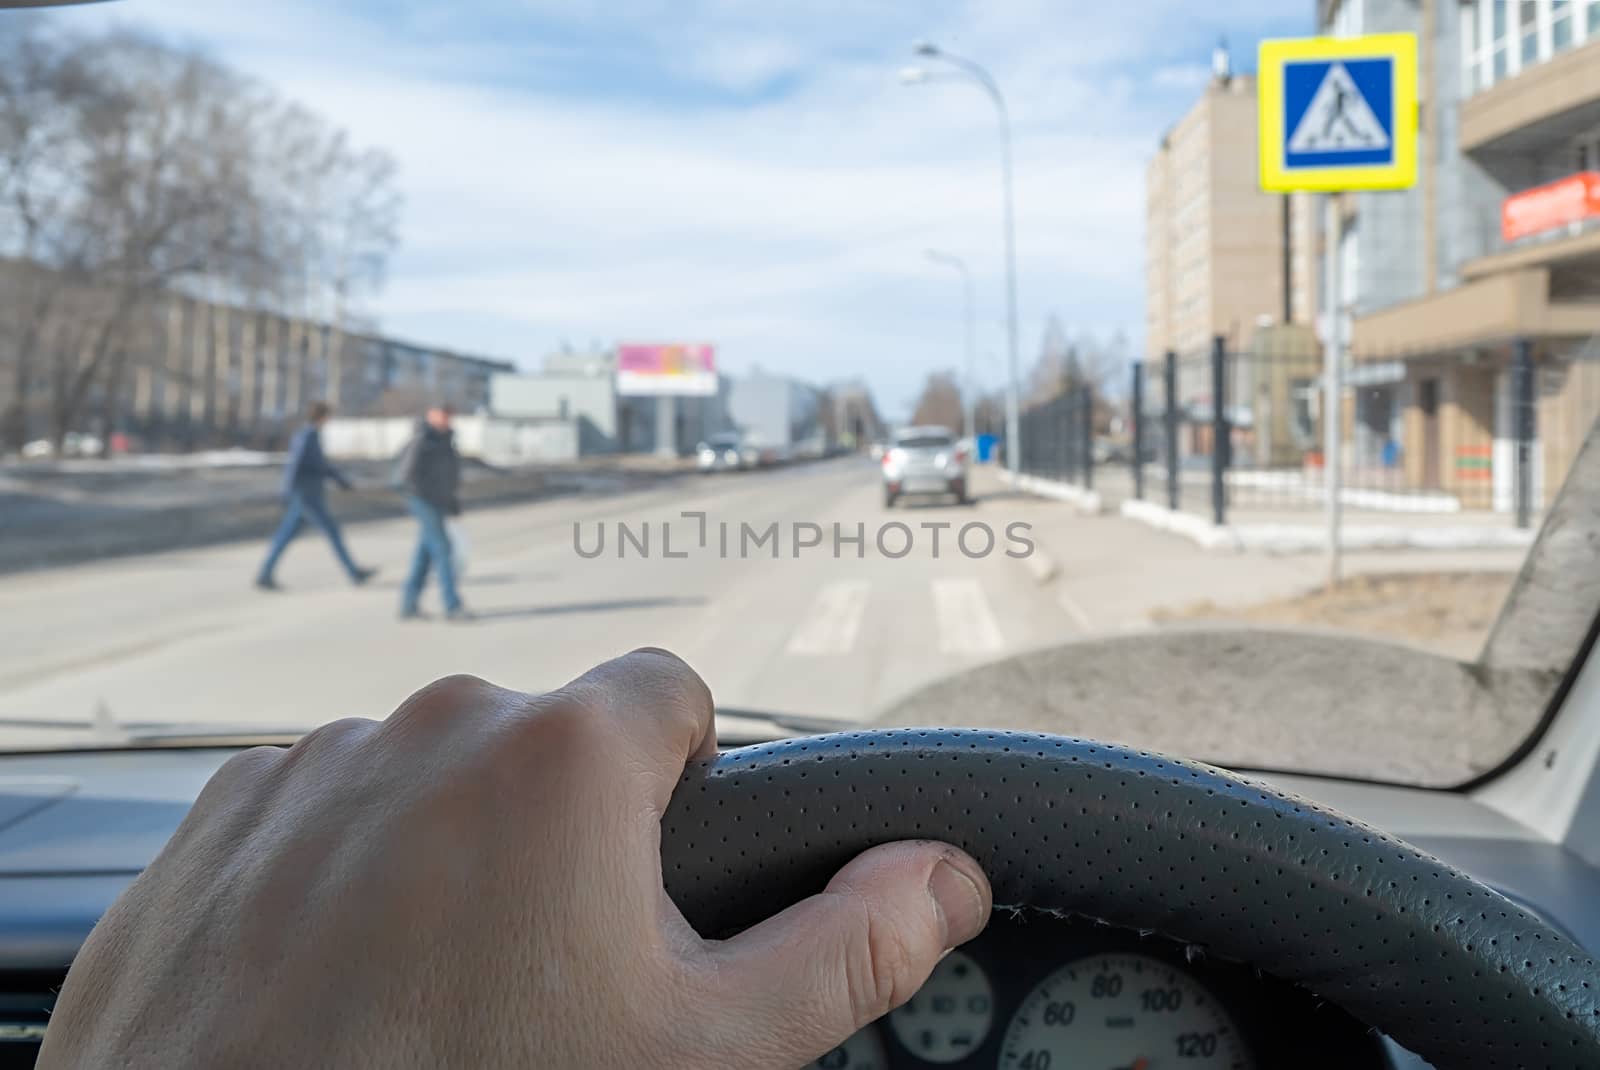 view from the car, the driver hand on the steering wheel of the car, located opposite the pedestrian crossing and pedestrians crossing the road